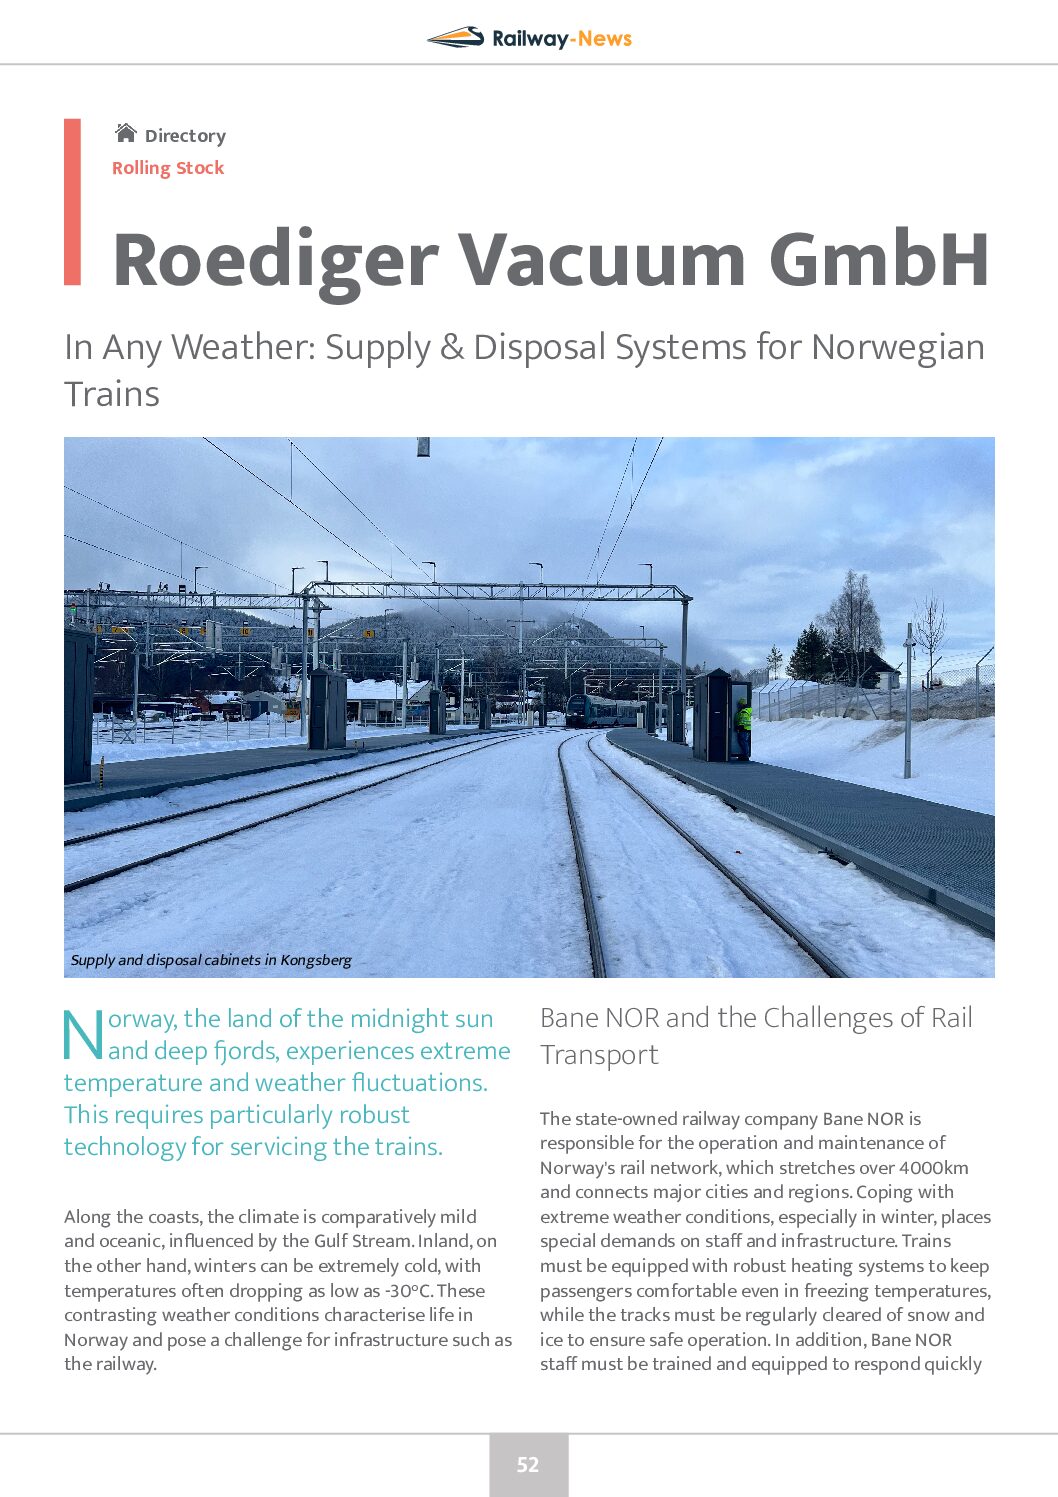 In Any Weather: Supply & Disposal Systems for Norwegian Trains